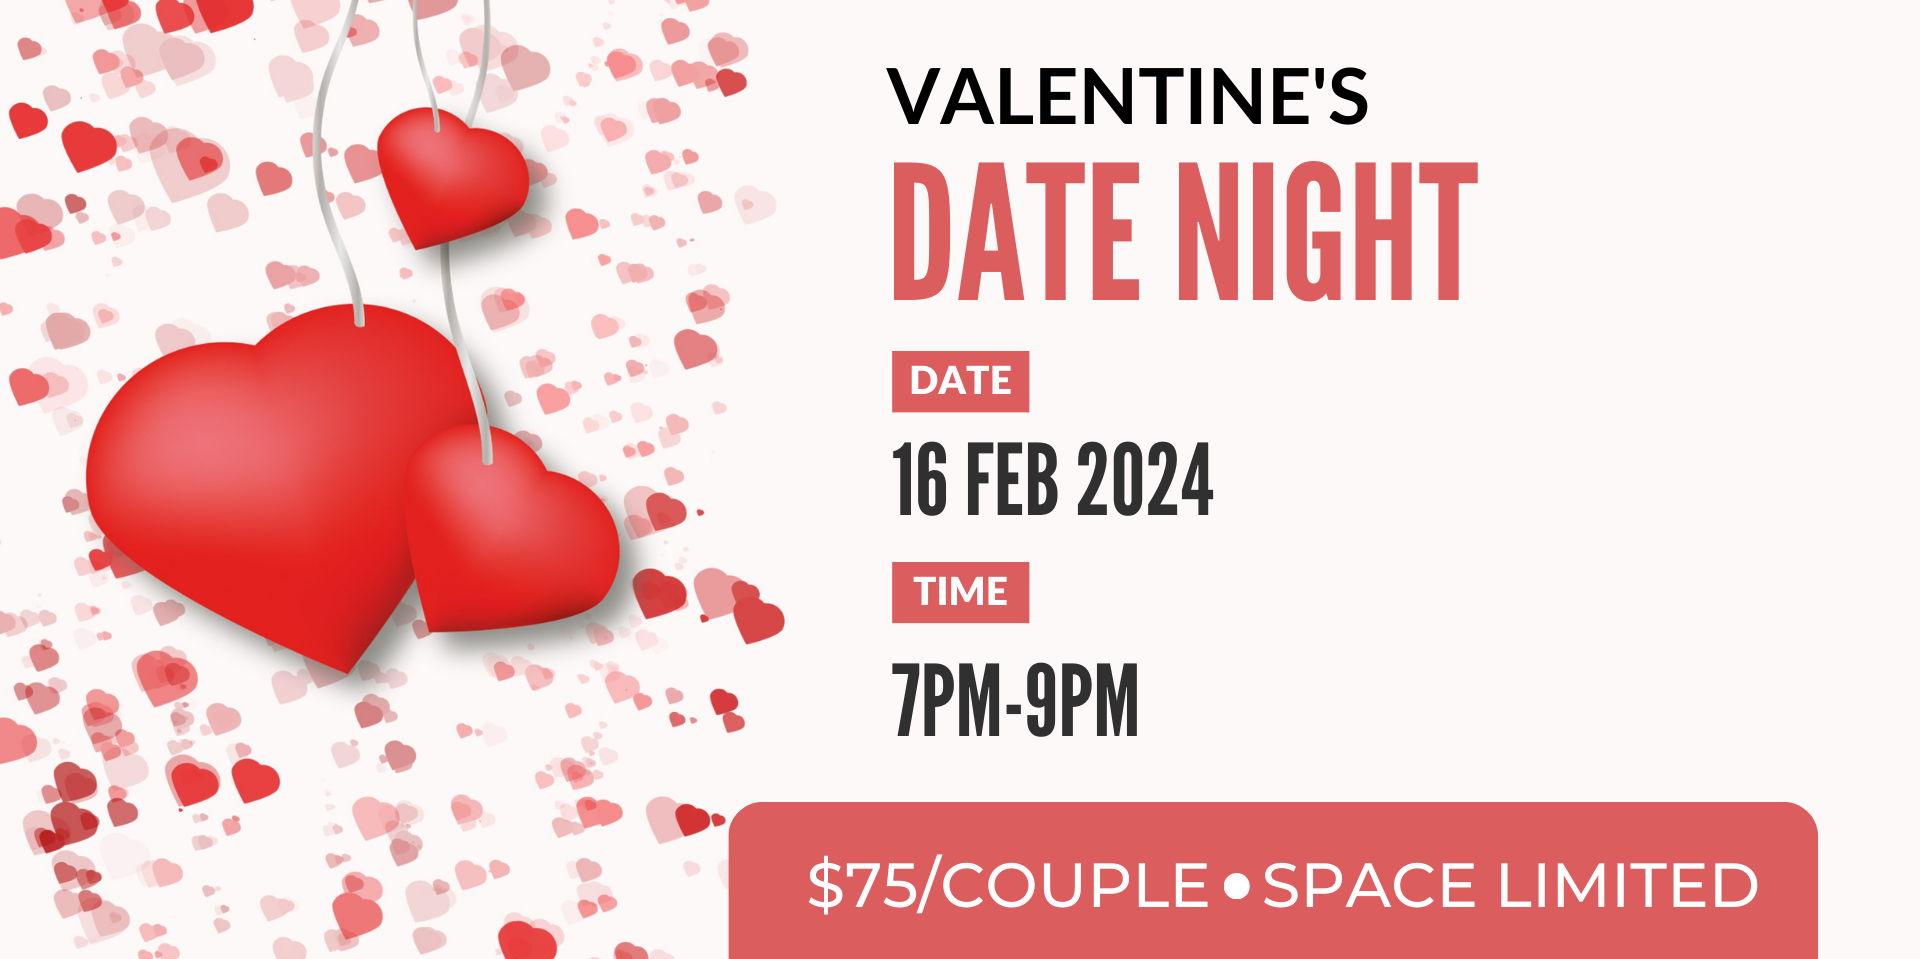 Valentine's Date Night Dance Class promotional image